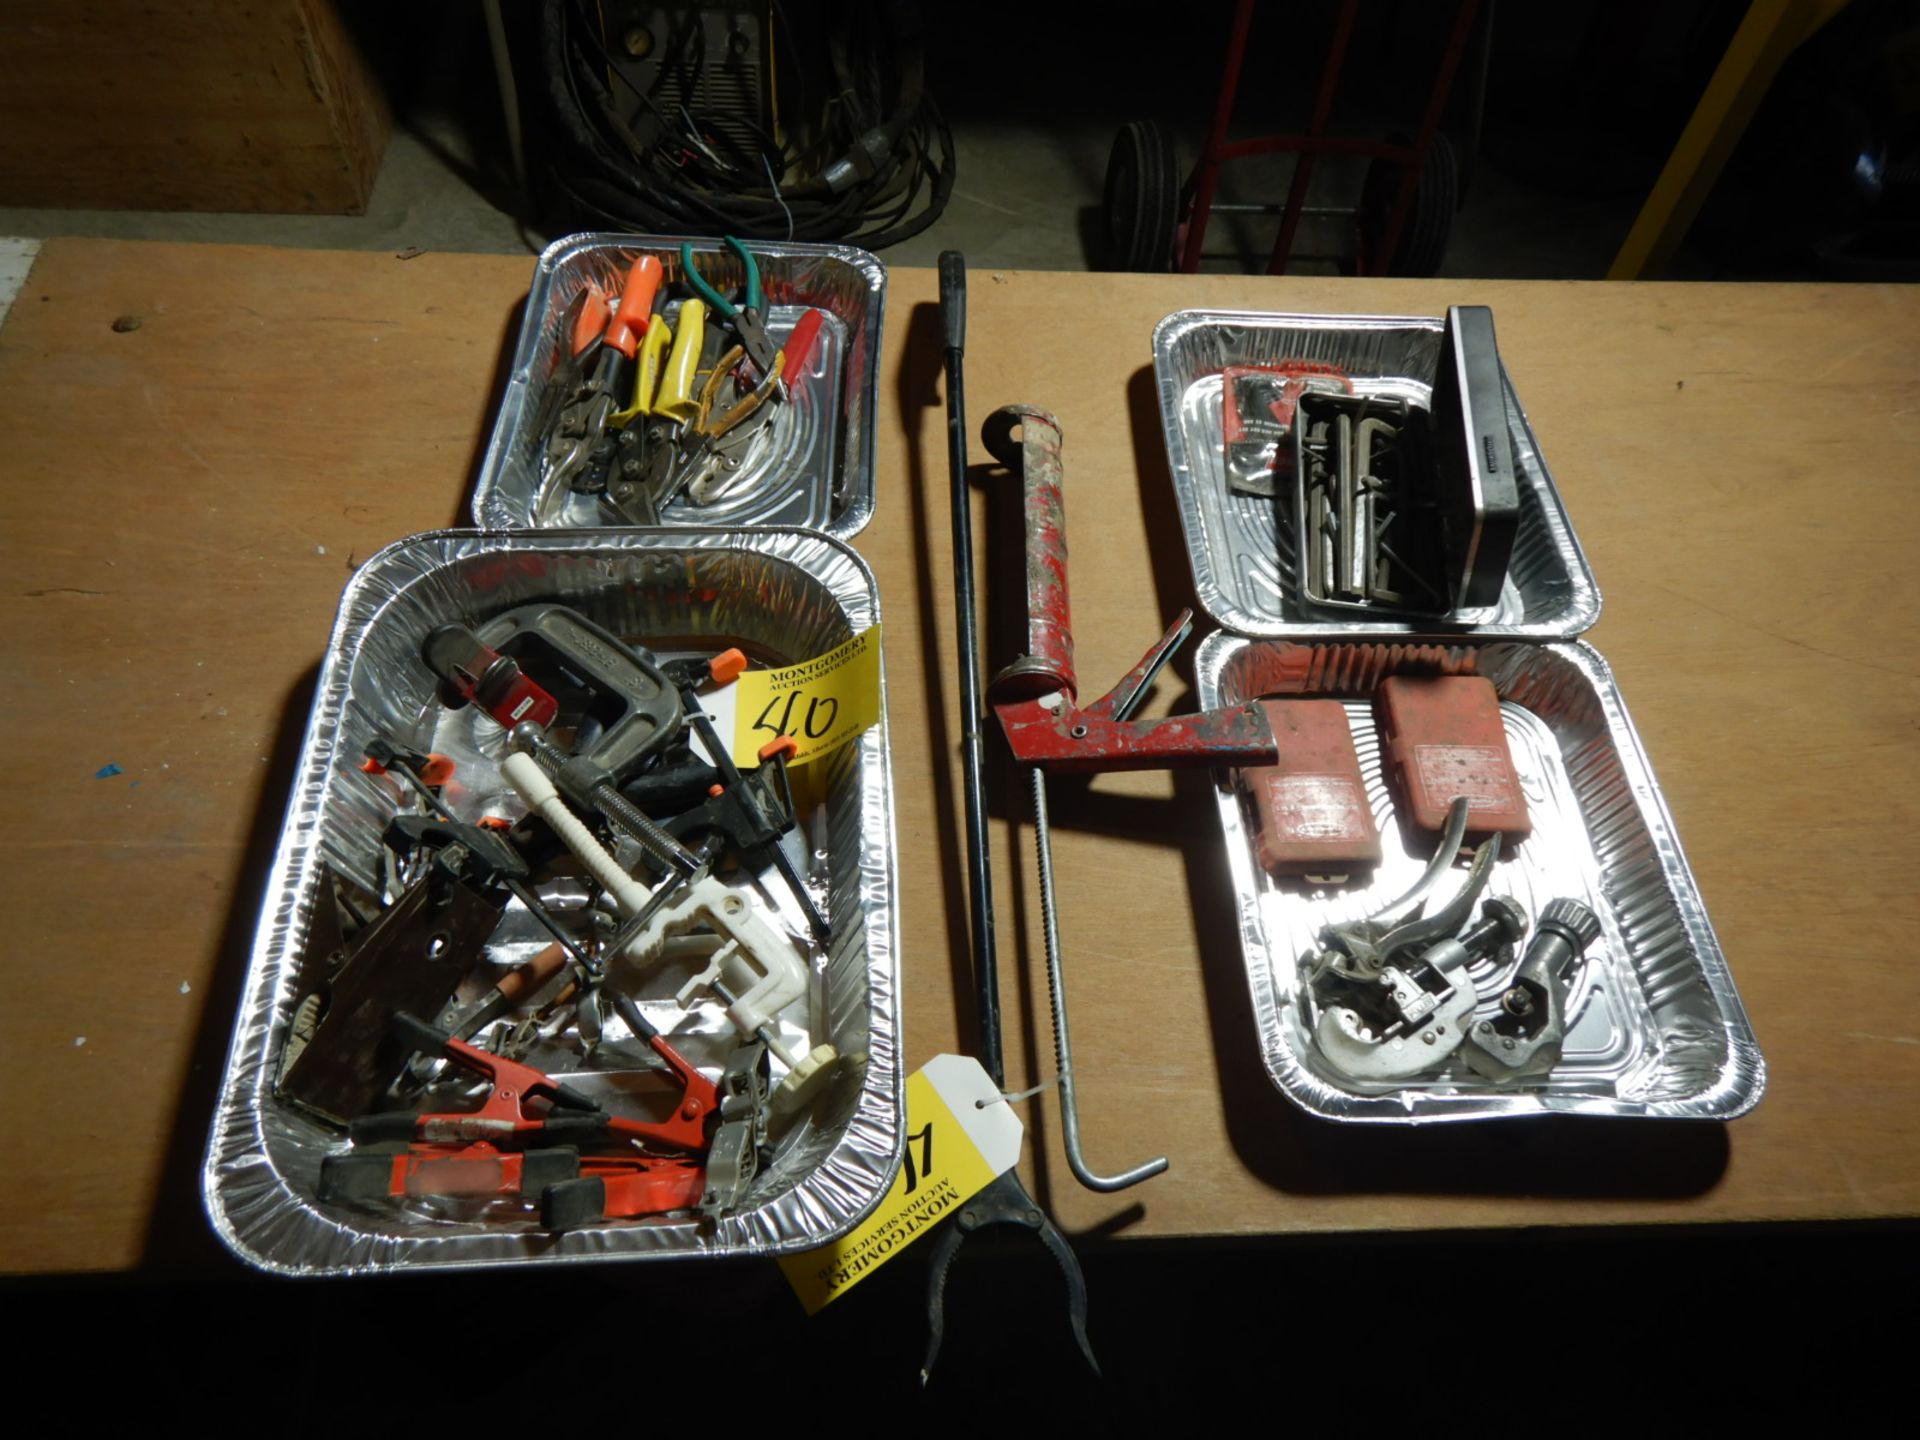 TUBING CUTTERS, VARIOUS CLAMPS, SIDE CUTTERS, HEX KEYS, ETC - Image 2 of 2